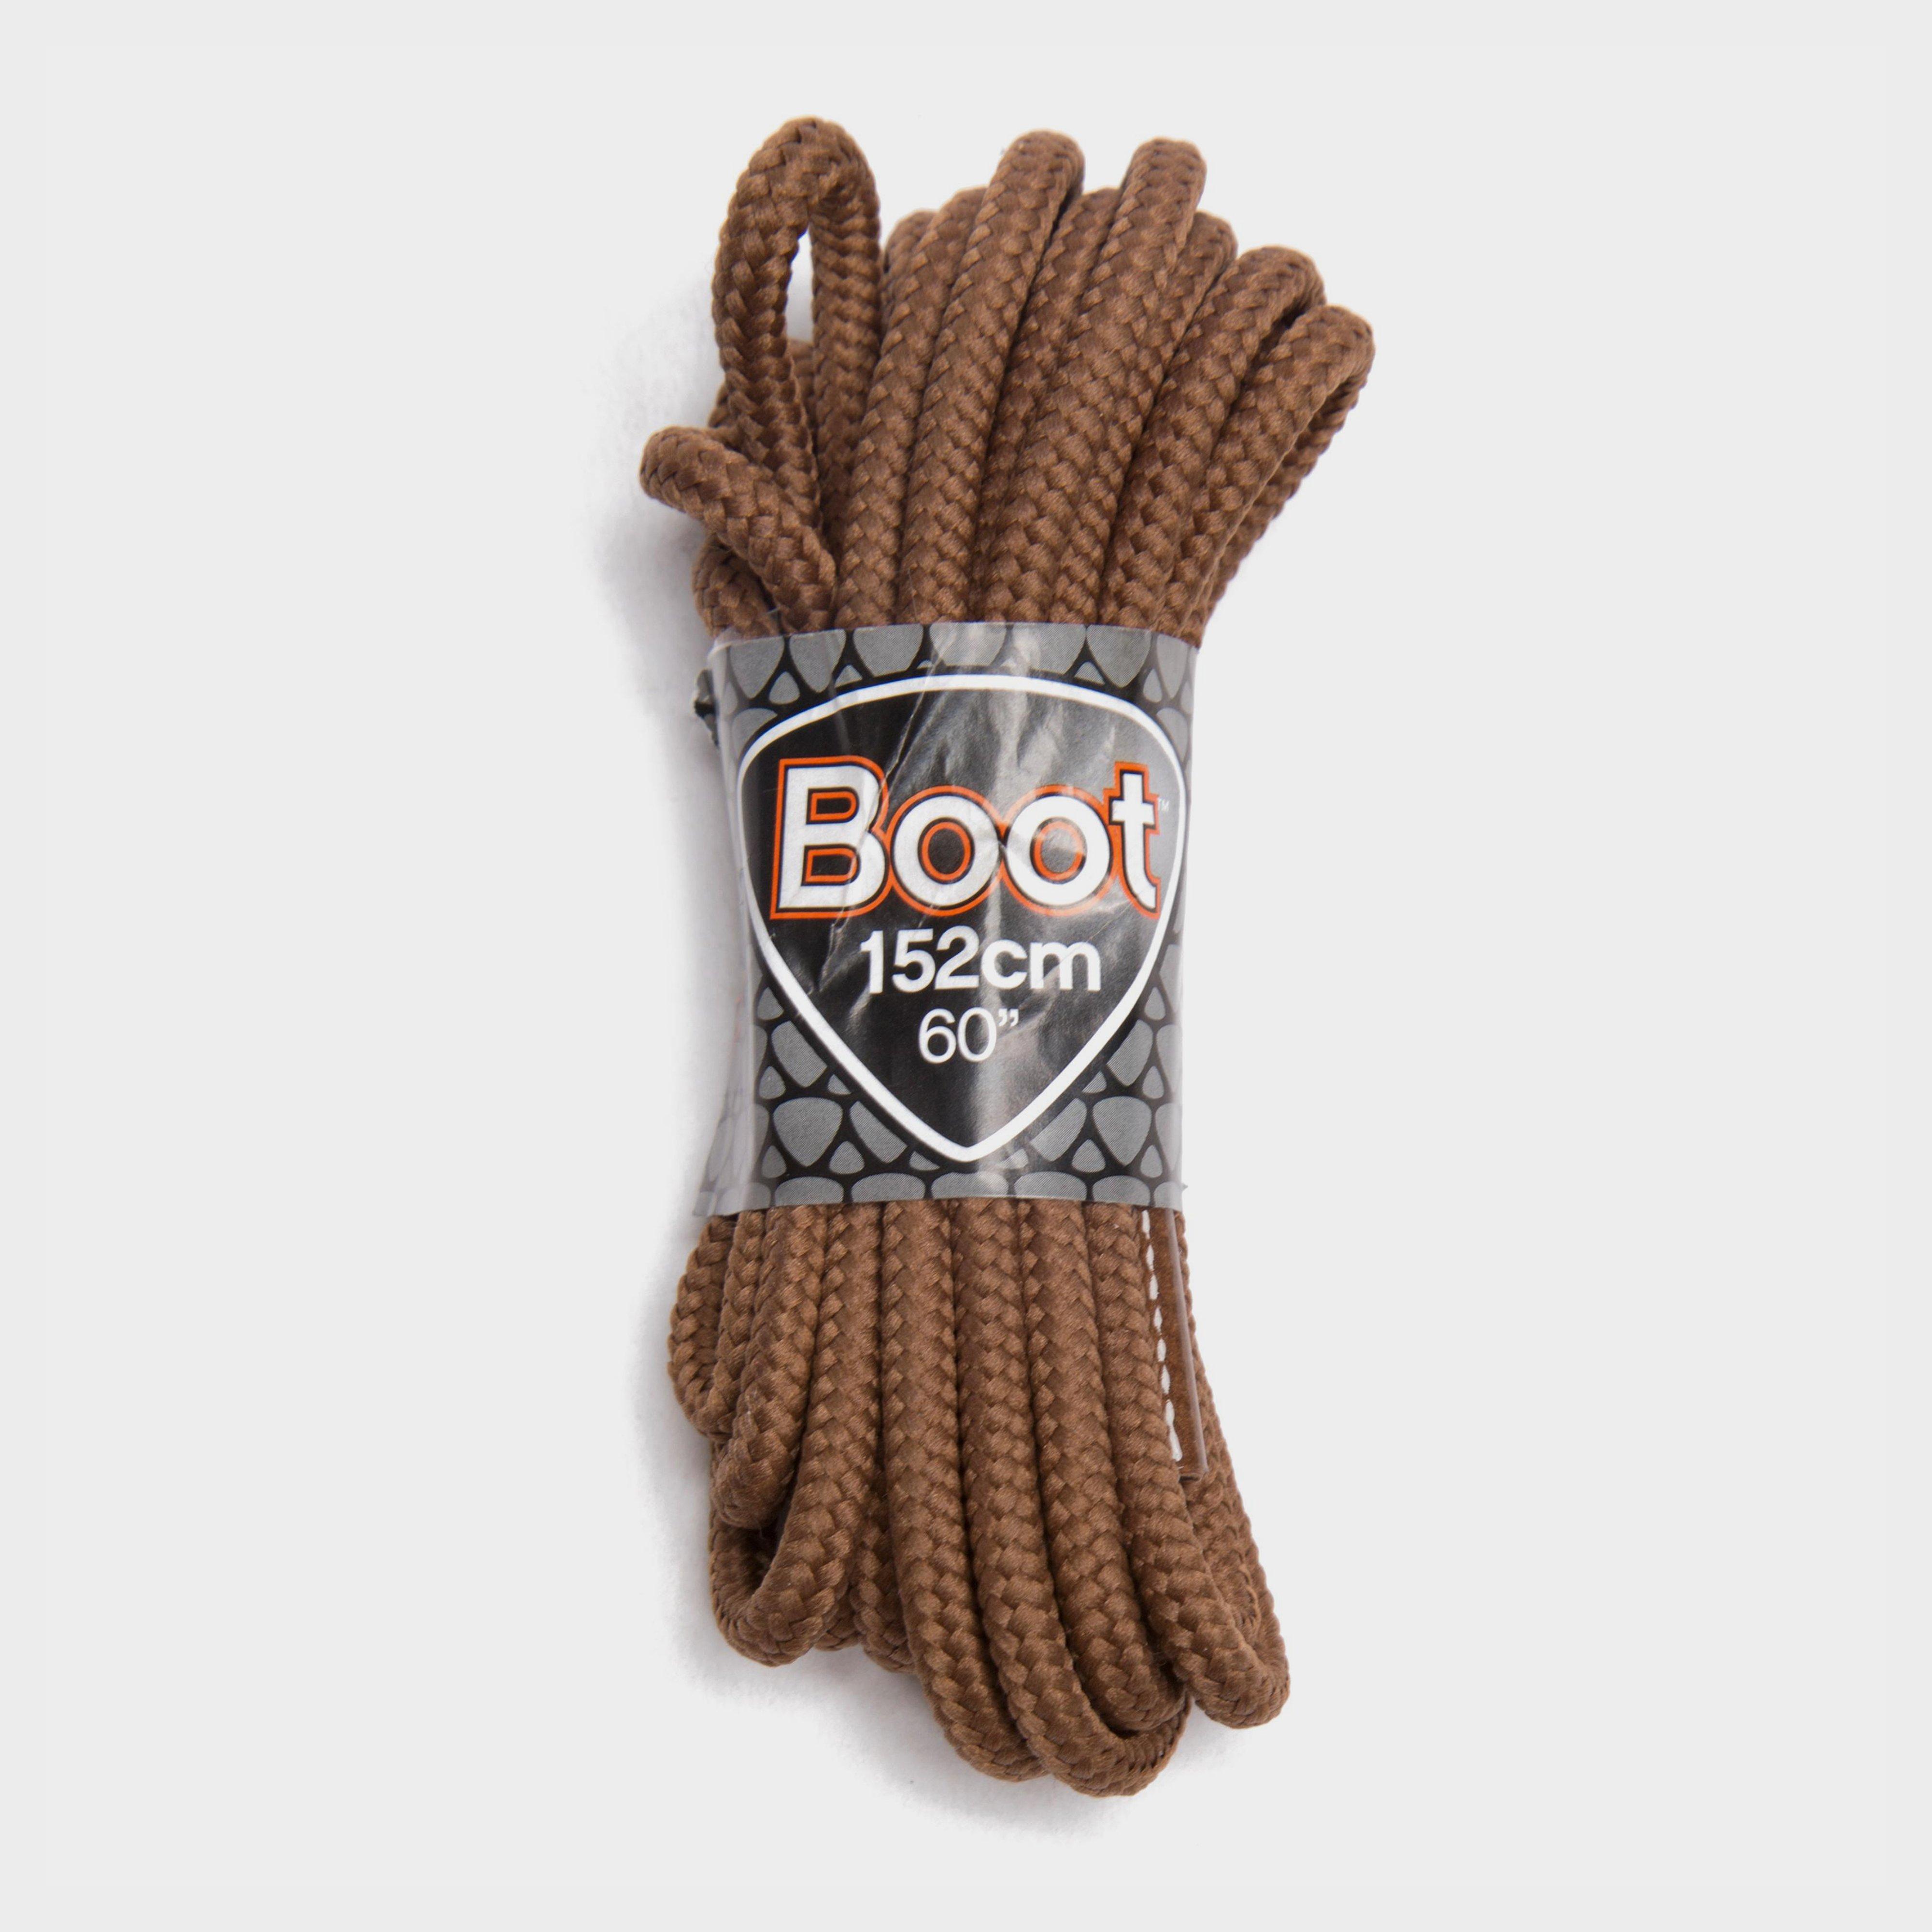 Sof Sole Wax Boot Laces - 152cm - Brown/brn  Brown/brn